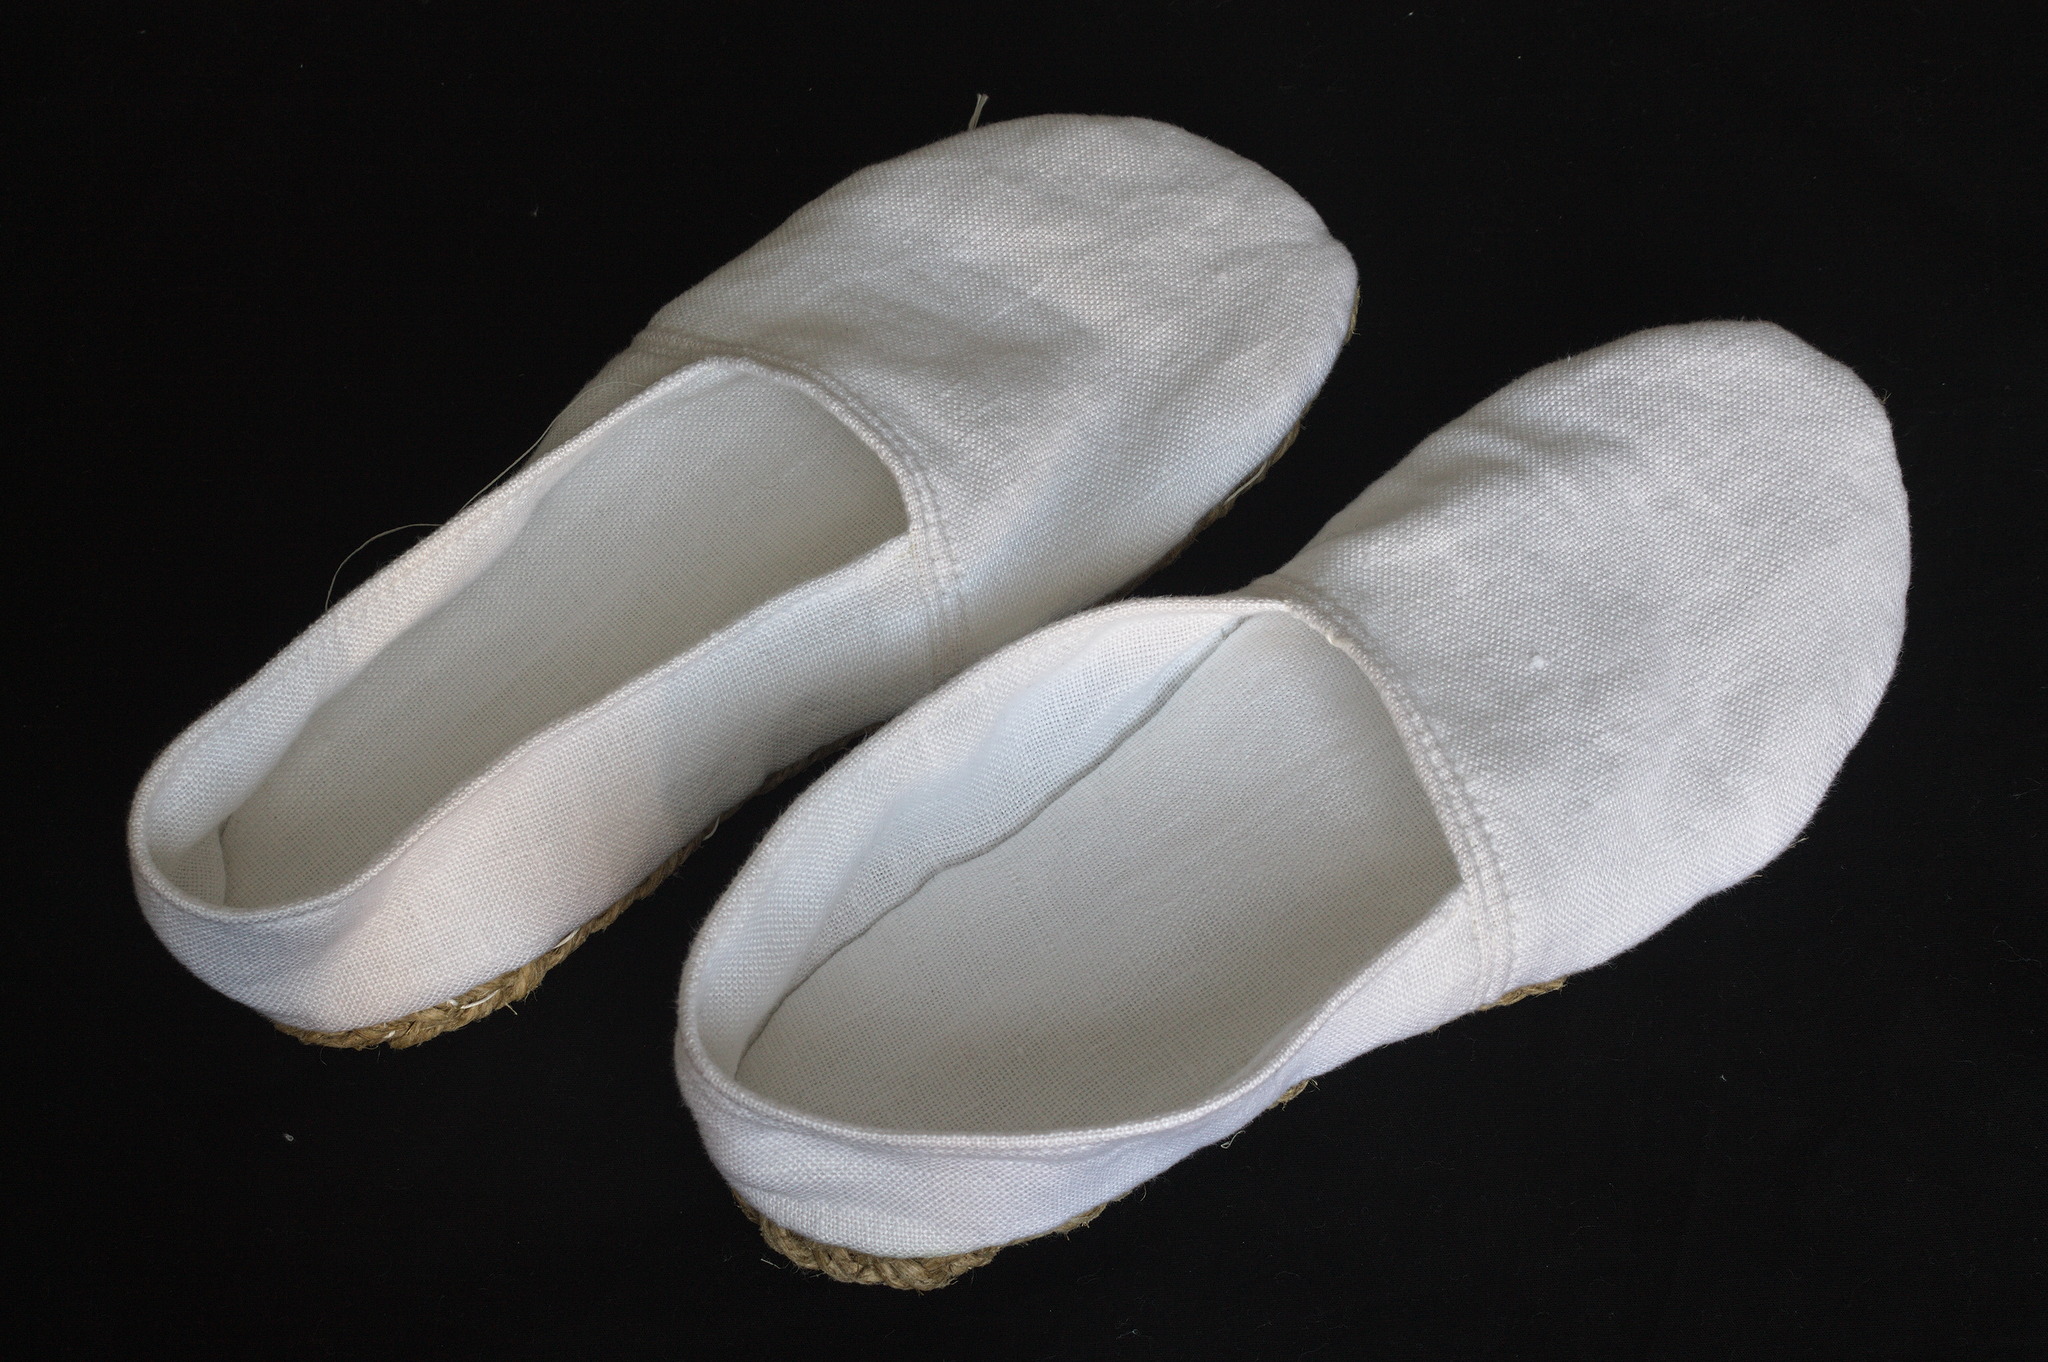 A pair of espadrille-like slippers in white fabric.